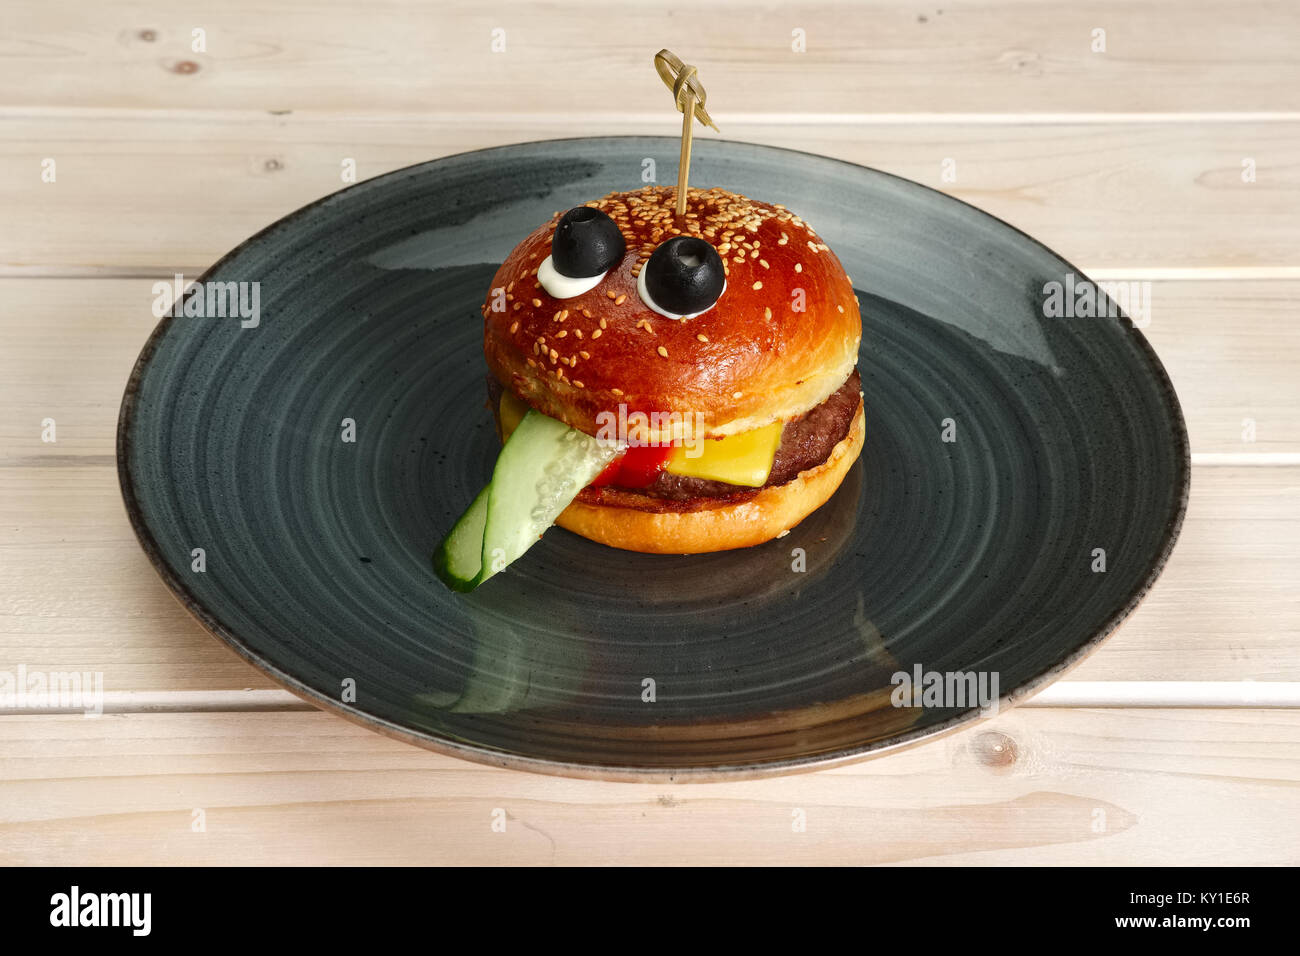 Funny meal for children. Burger in sahpe of face with pulled out tongue Stock Photo